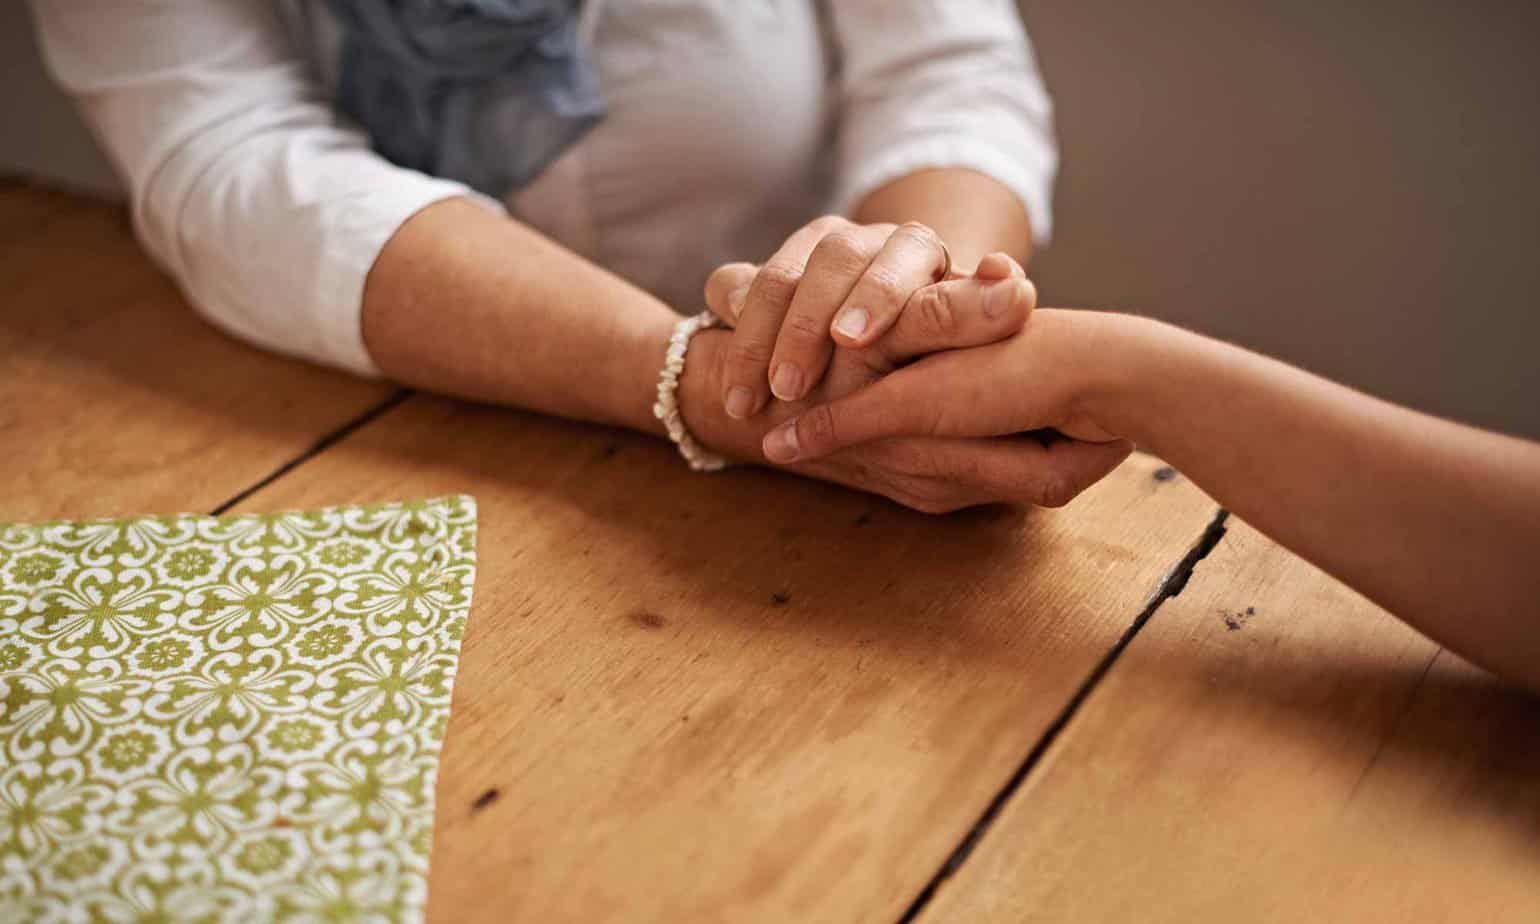 An older woman wearing a white shirt and bracelet holding a hand of a younger person on a wooden table at Mountainside Treatment Center